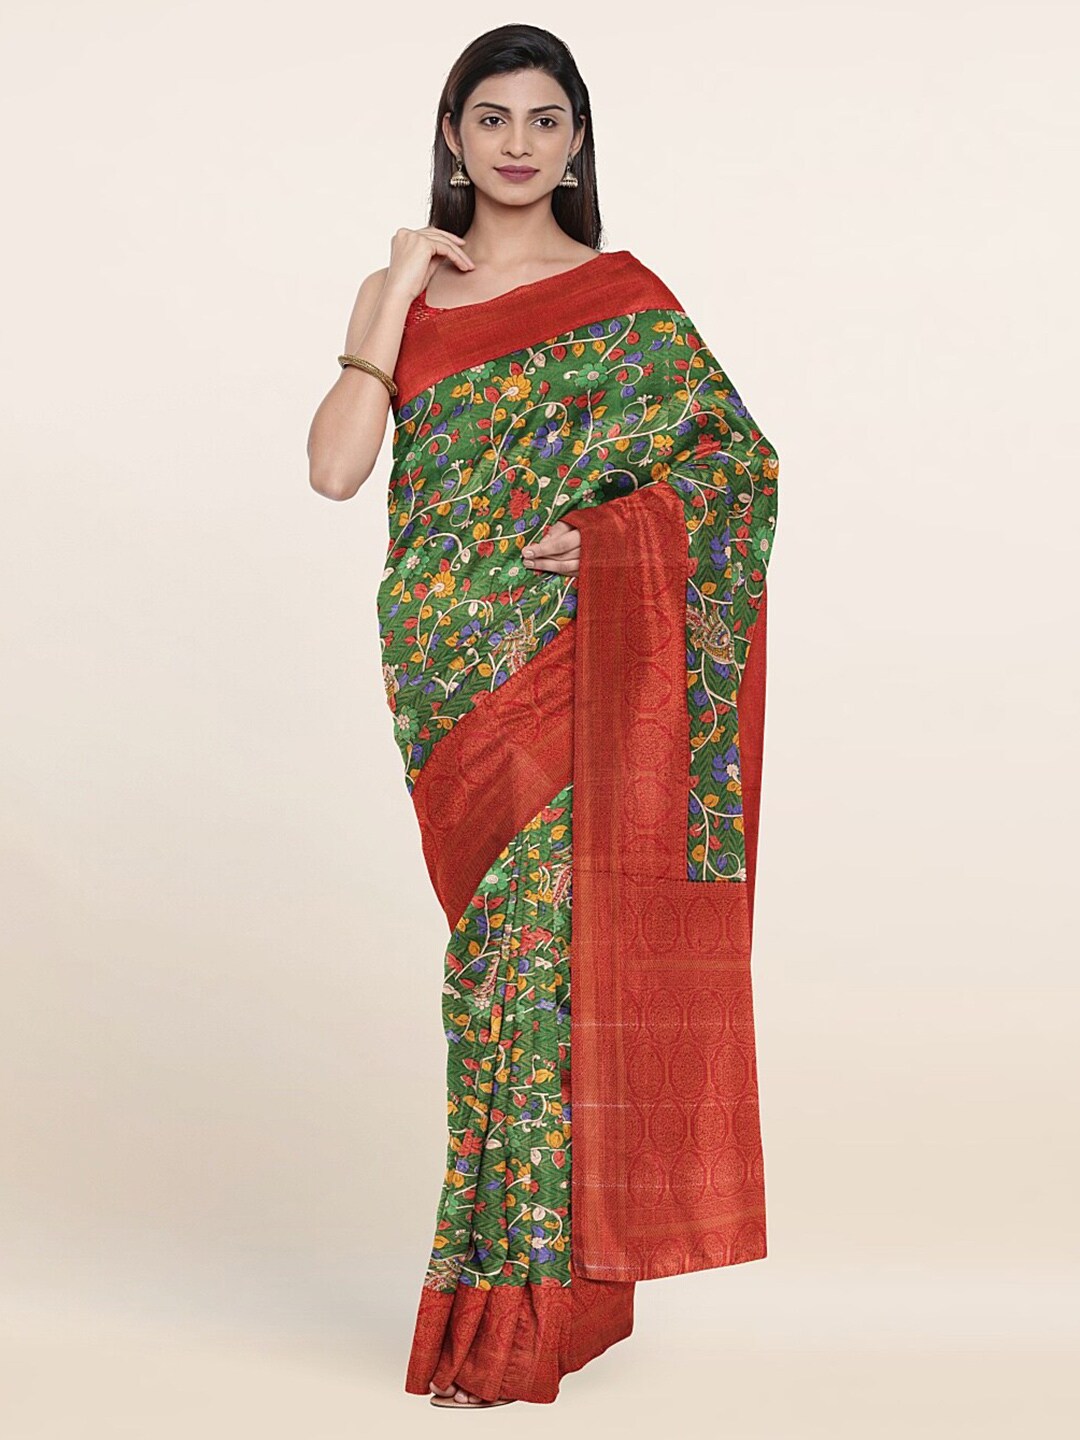 Pothys Women Green & Red Floral Art Silk Saree Price in India